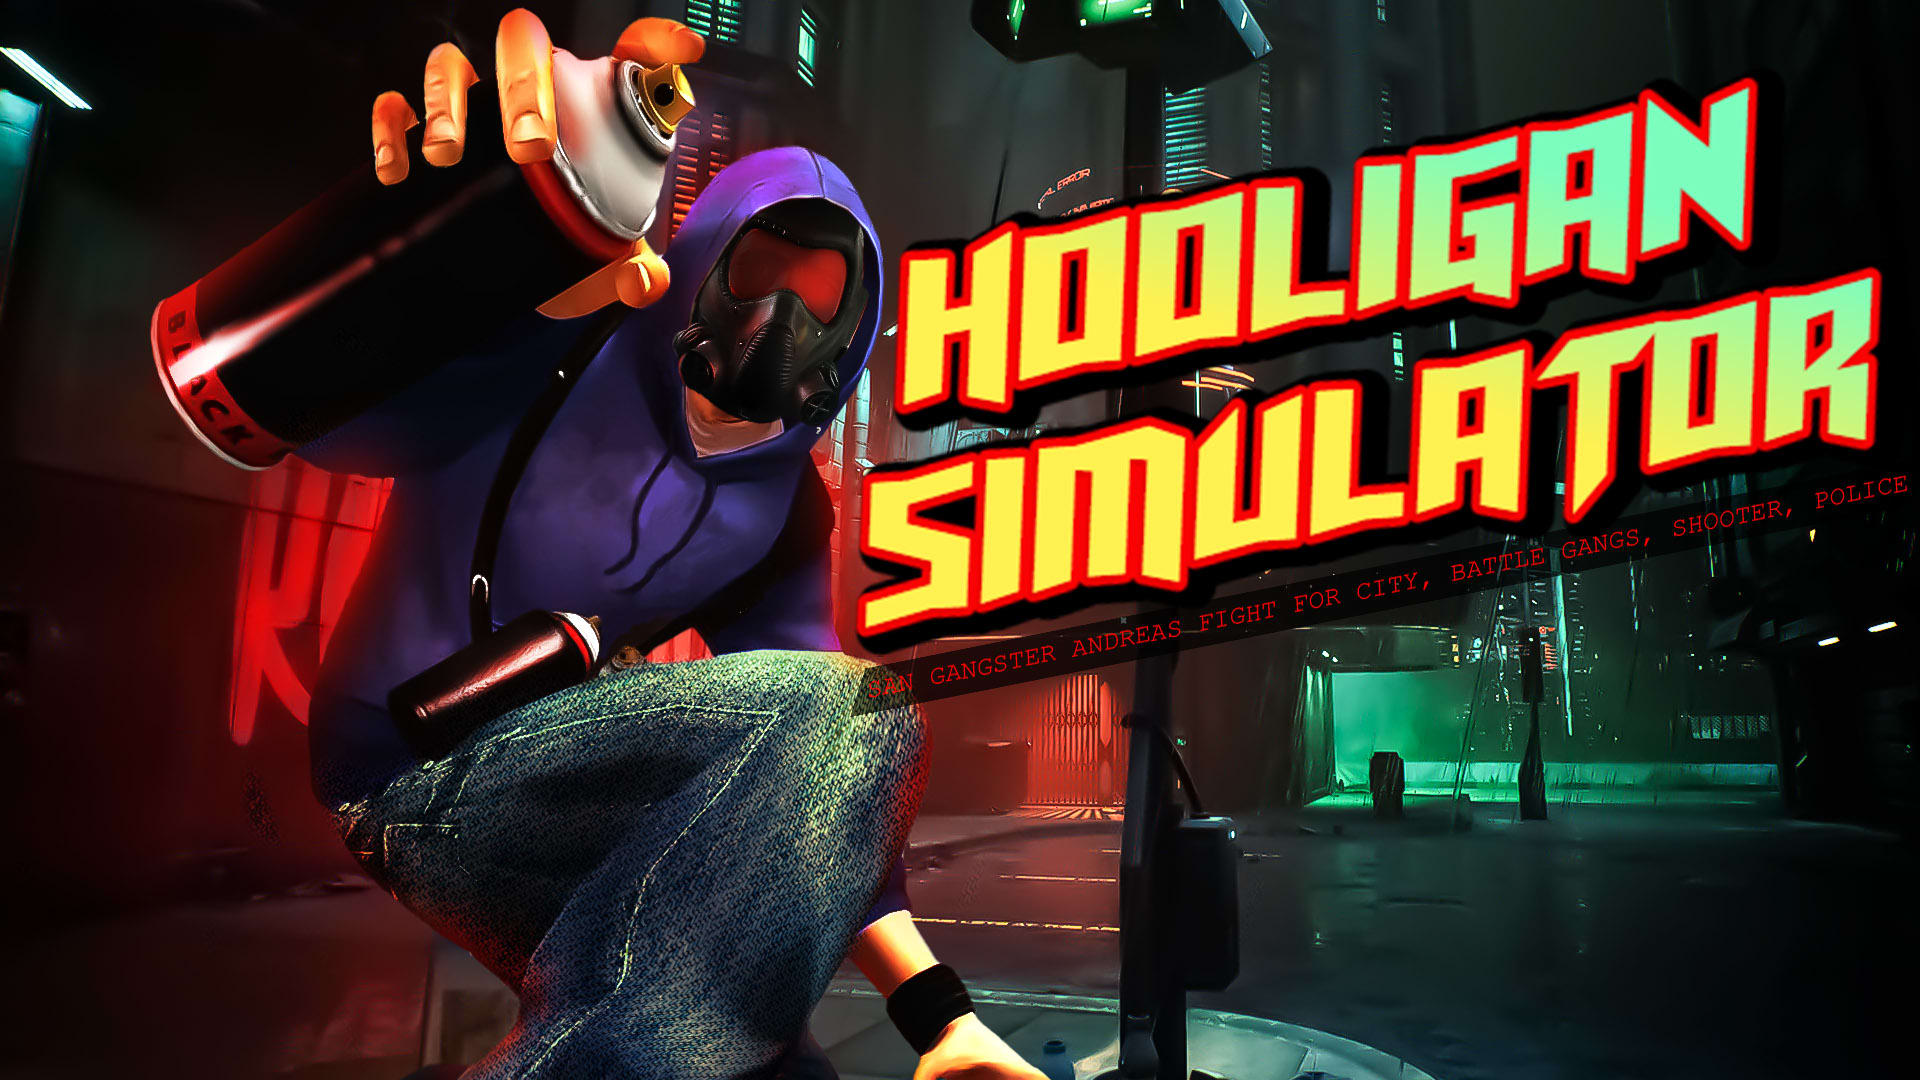 Hooligan Simulator - San Gangster Andreas Fight for City, Battle Gangs, Shooter, Police 1